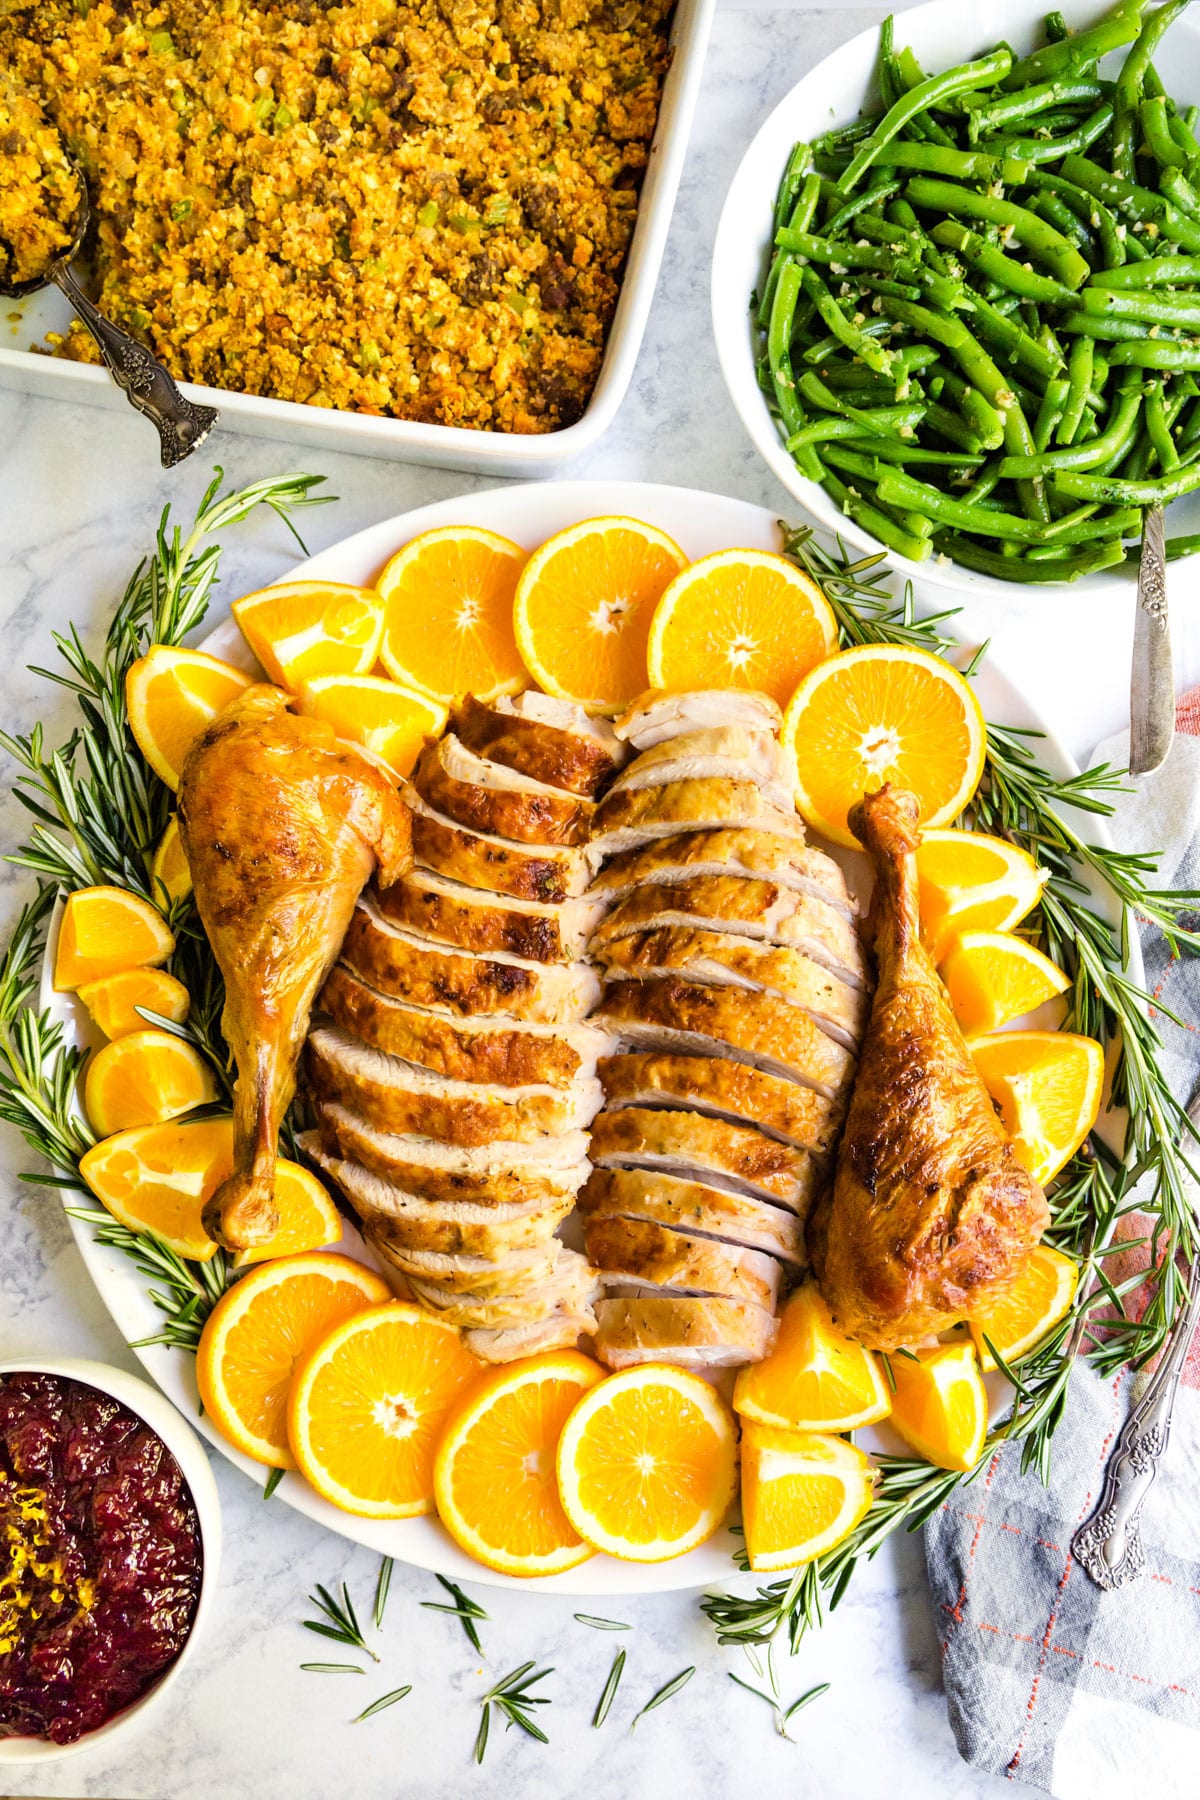 An overhead image of a thanksgiving table with the platter of carved turkey in the middle and green beans, dressing and cranberry sauce around it.